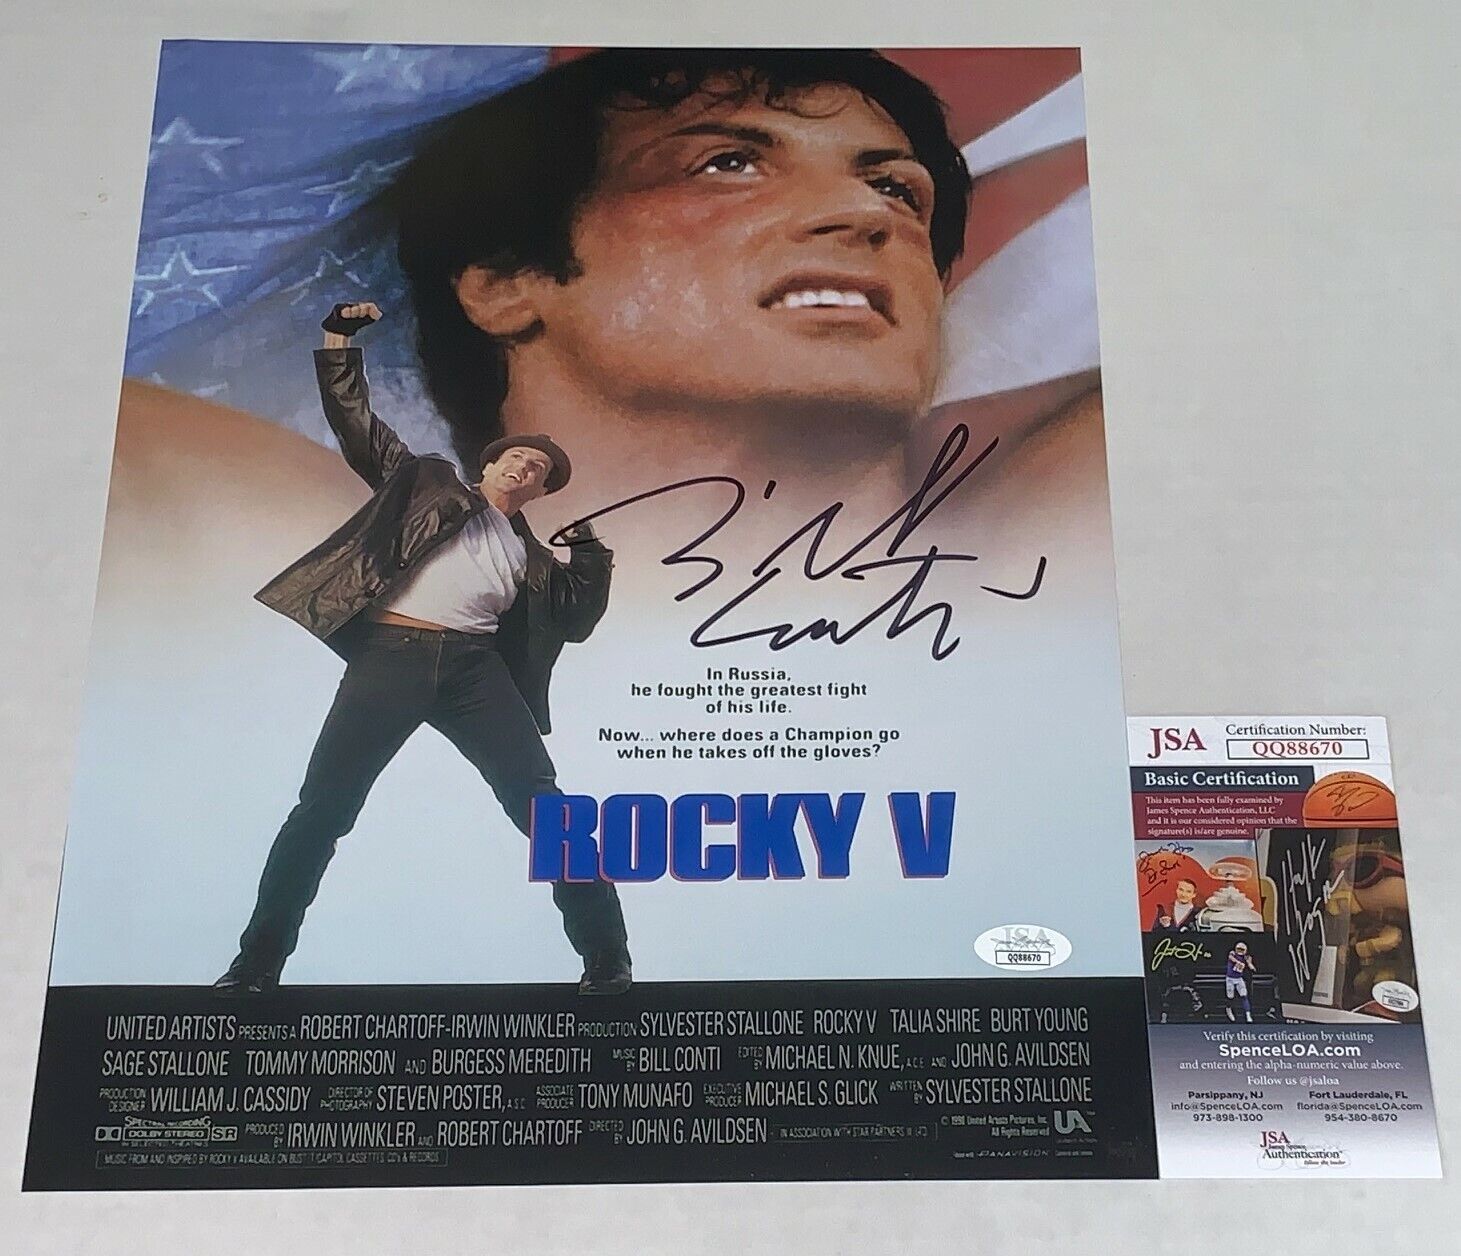 Bill Conti Composer signed Rocky V 11x14 Photo Poster painting autographed JSA Certified